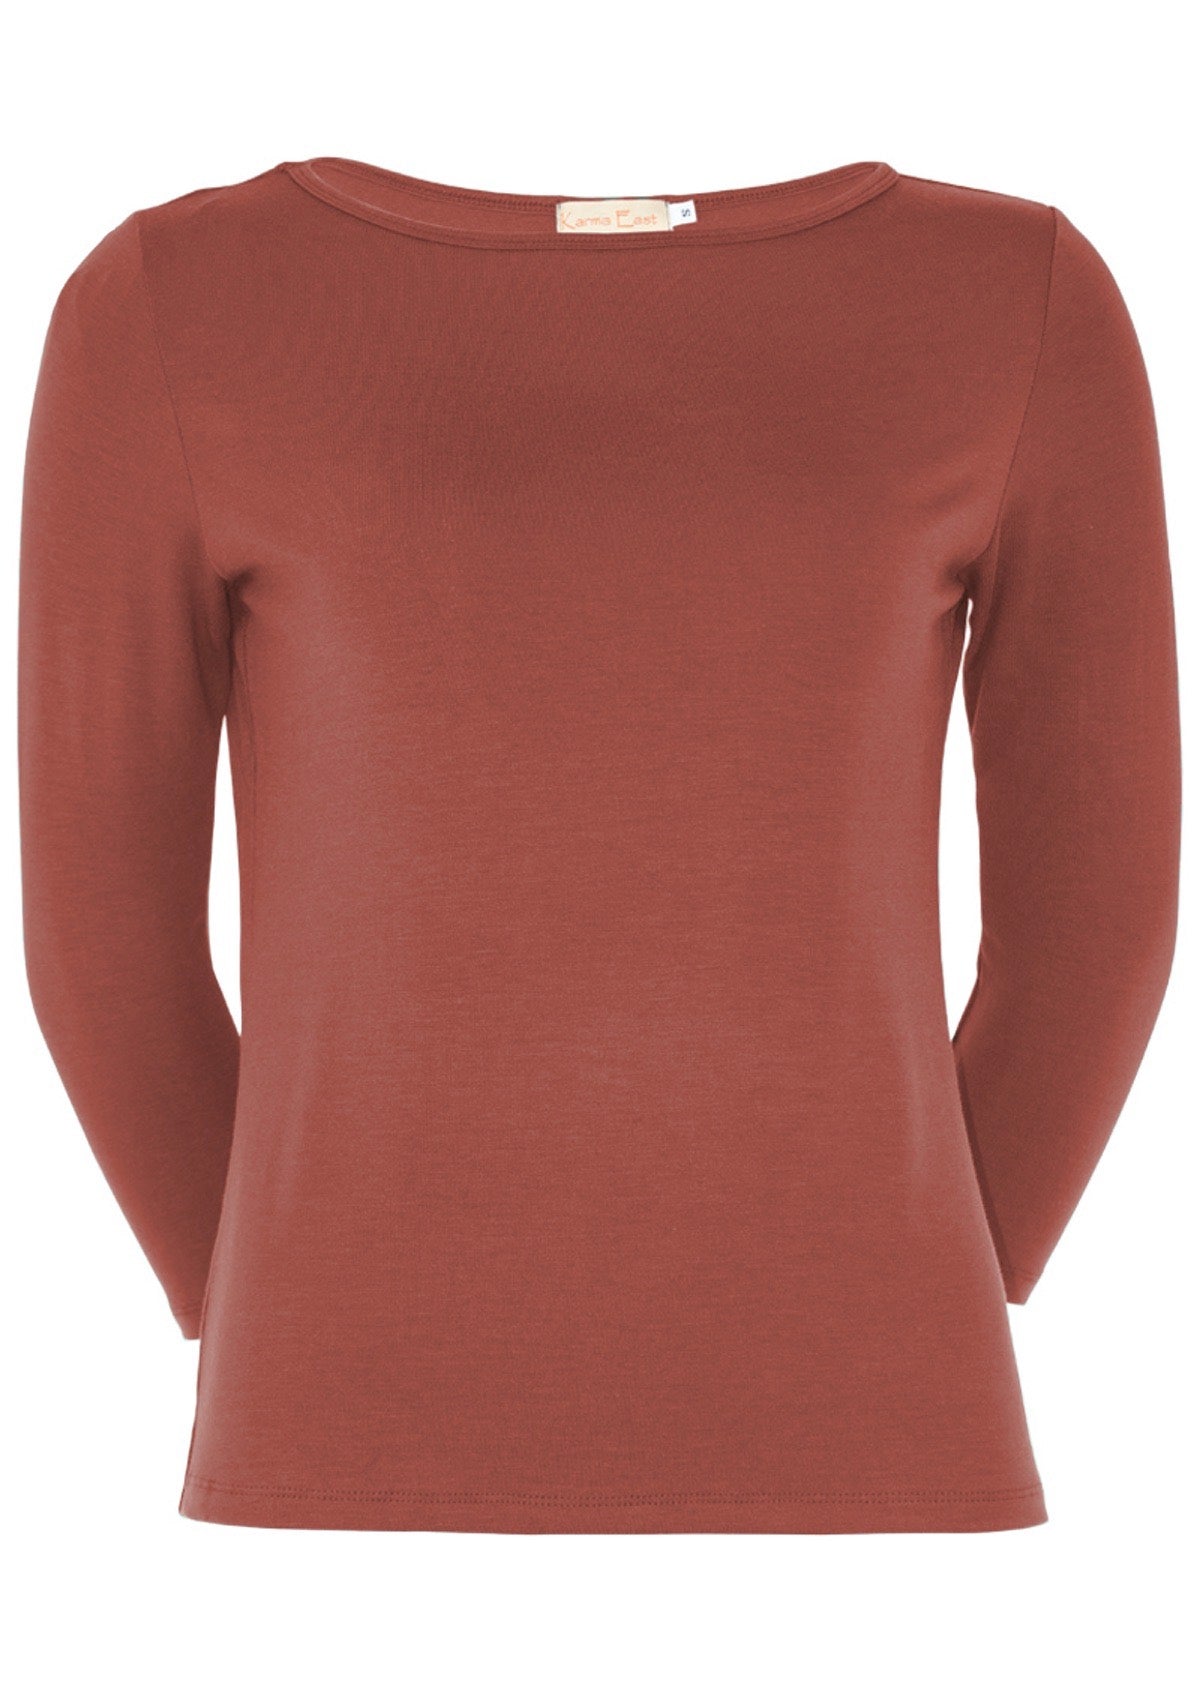 Front view of women's rayon boat neck terracotta pink 3/4 sleeve top.